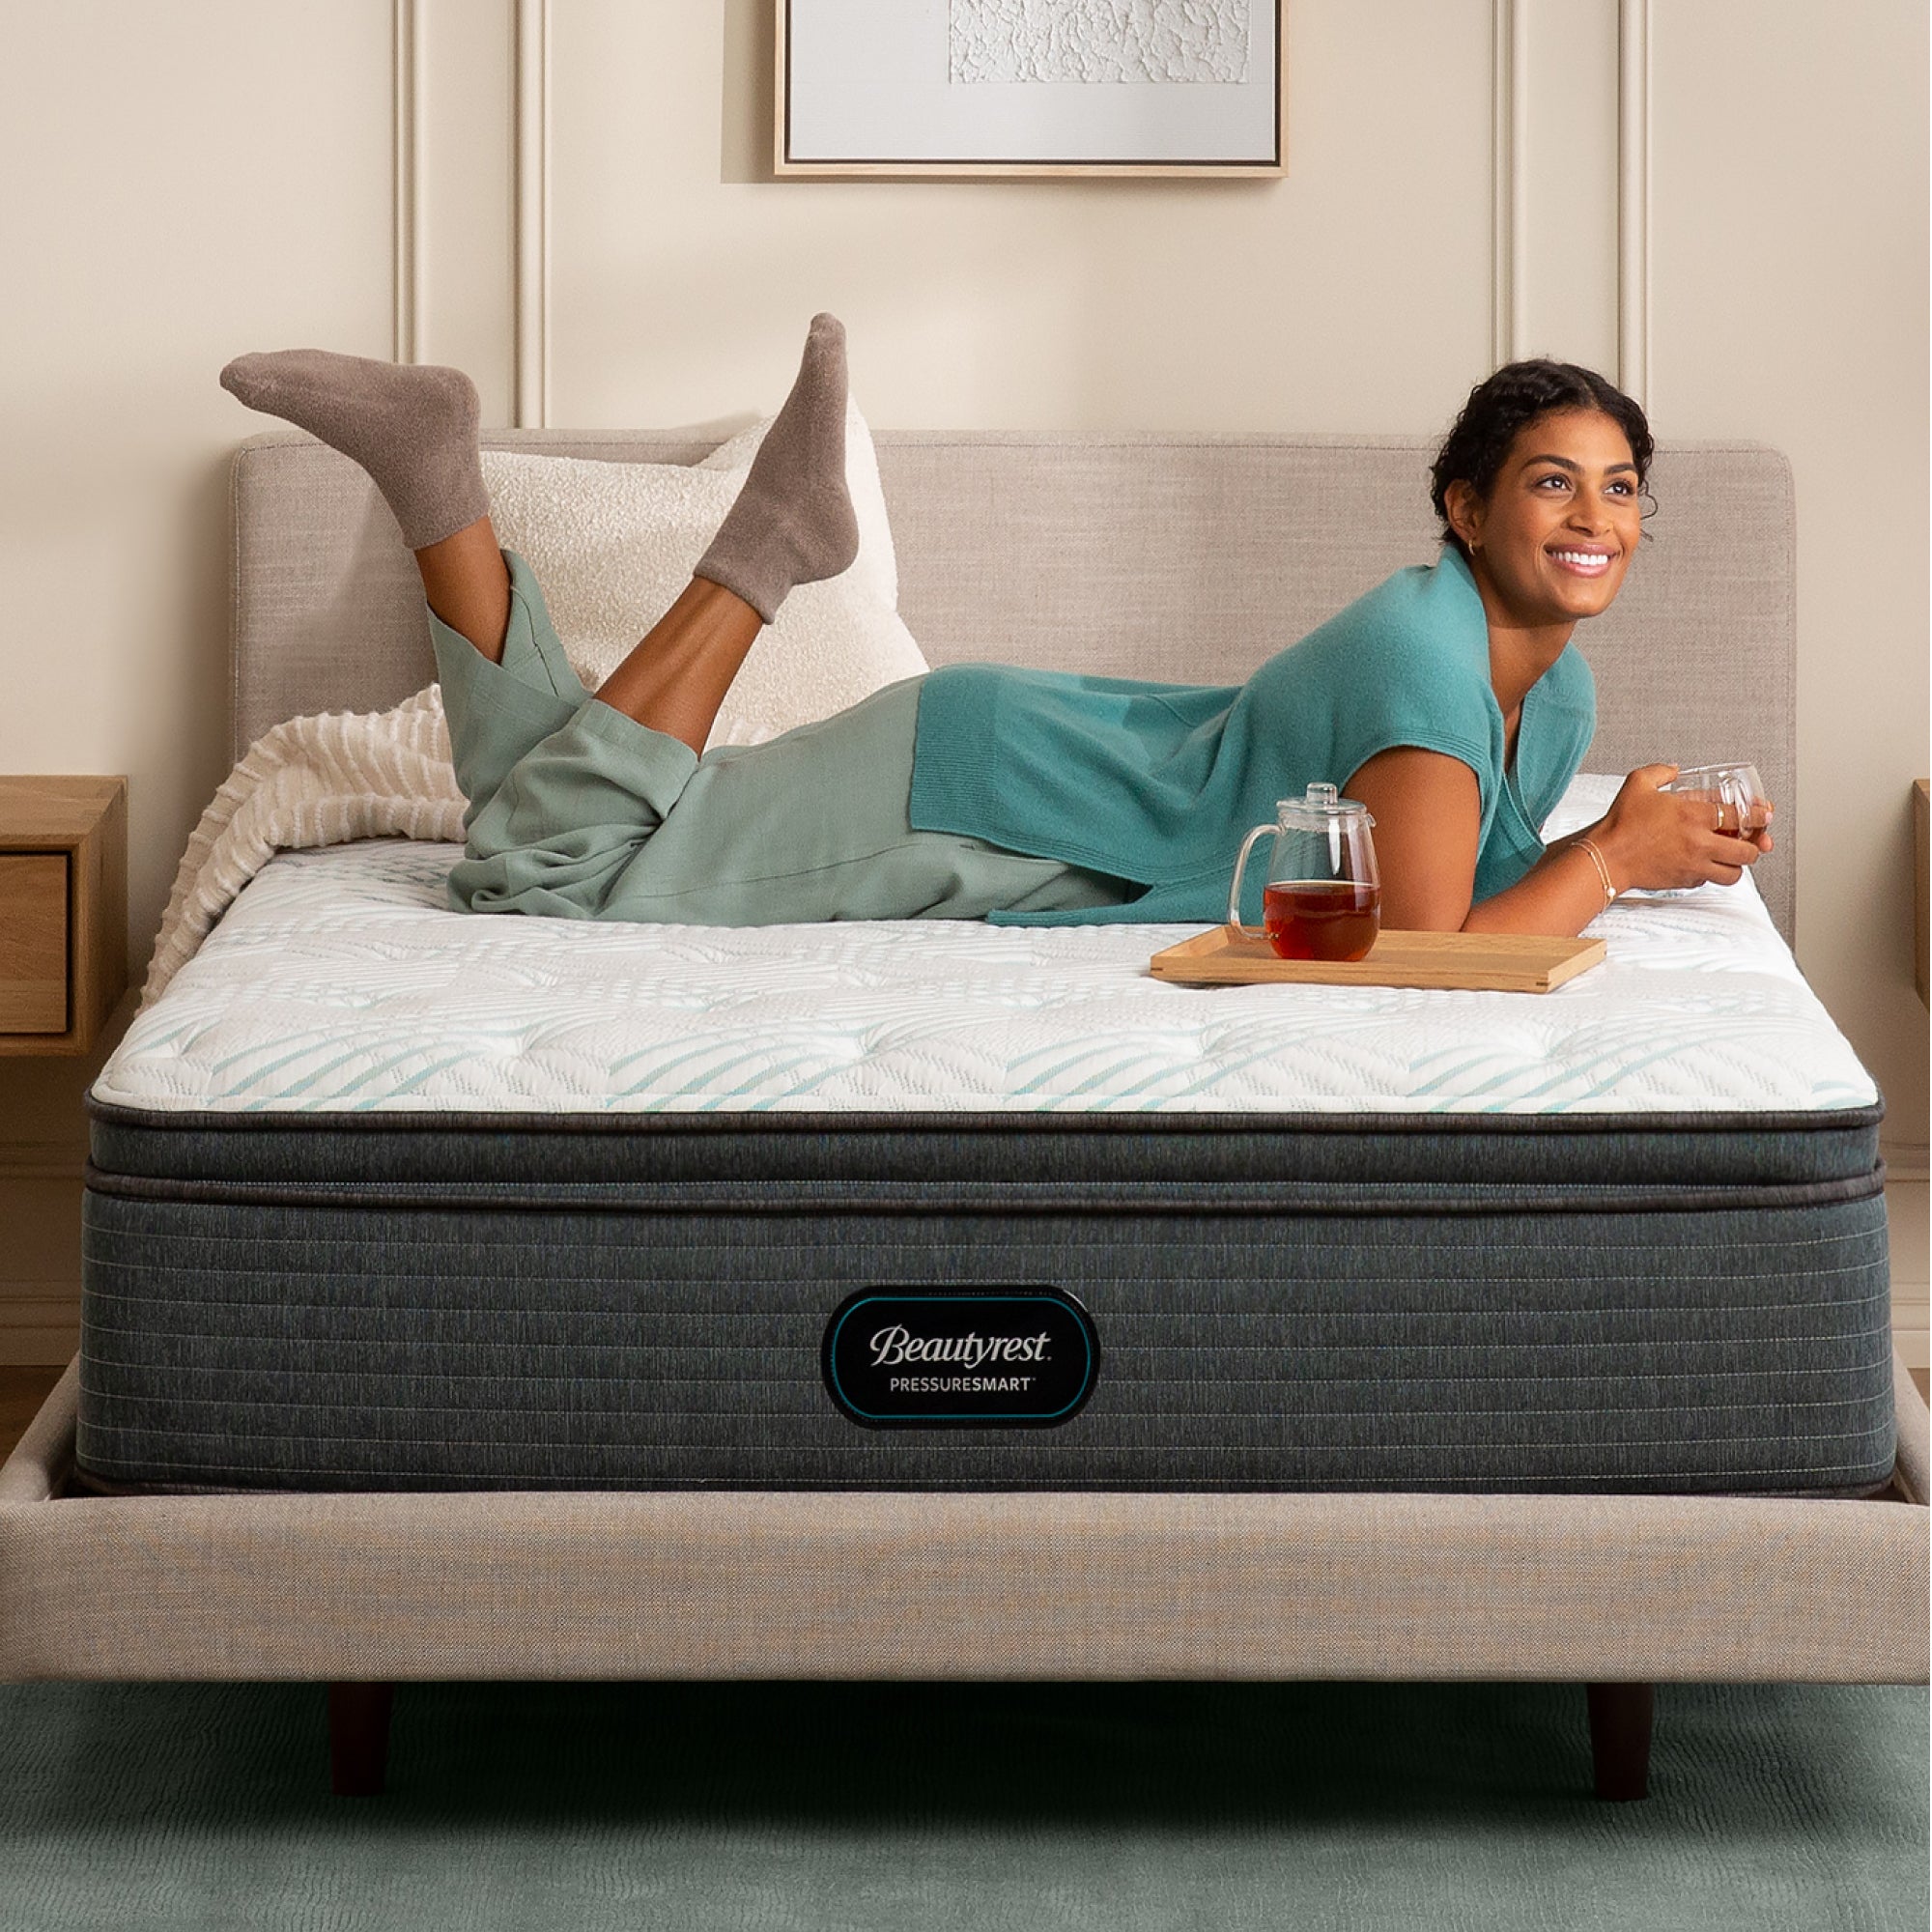 Woman drinking tea while laying on the Beautyrest PressureSmart mattress||feel: plush pillow top||series: standard